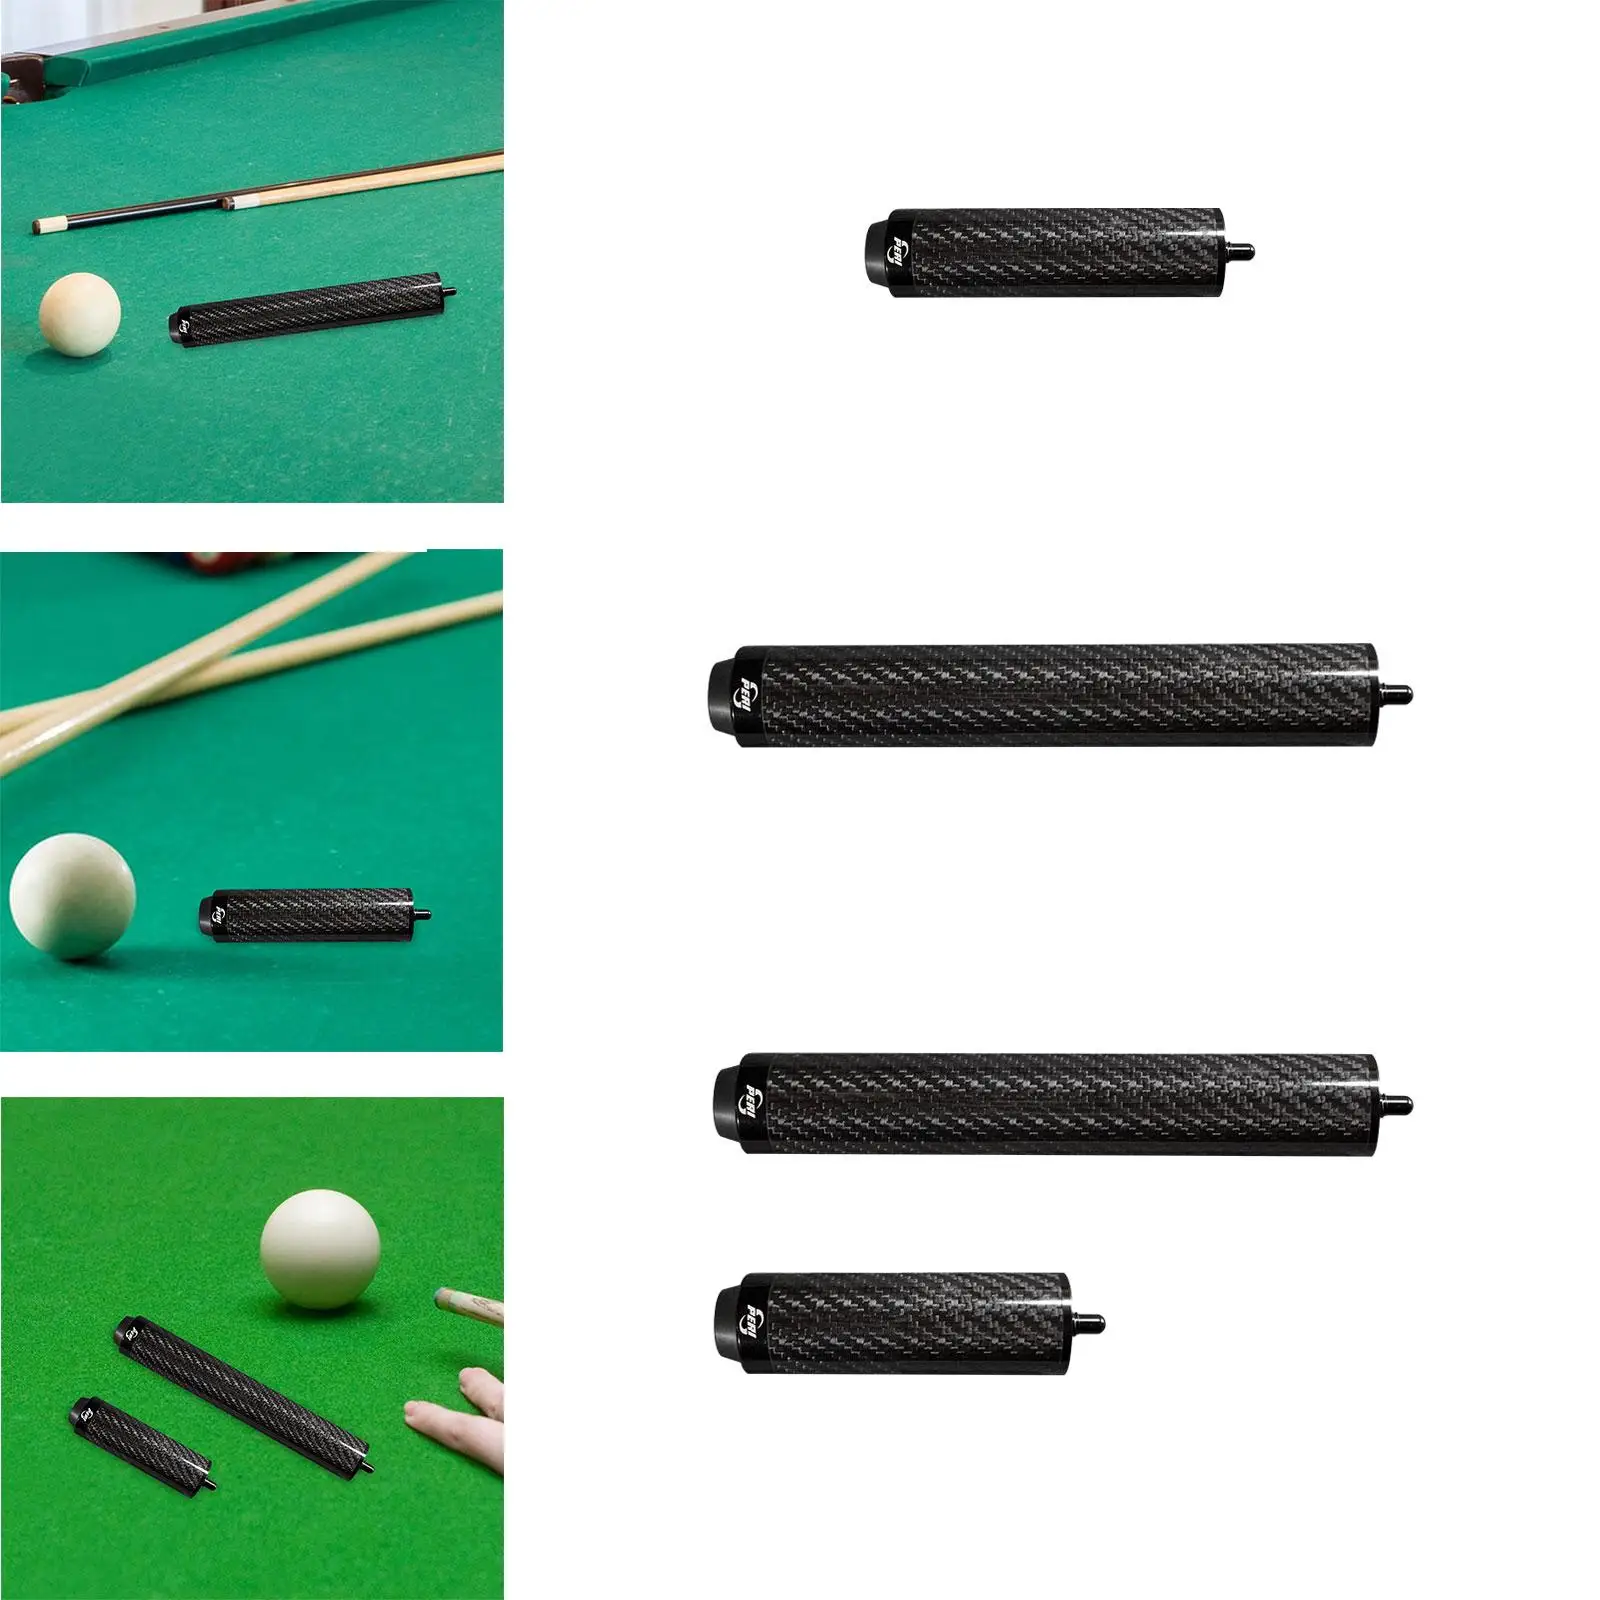 Billiards Pool Cue Extension Professional Athlete Snooker Cue Stick Extender